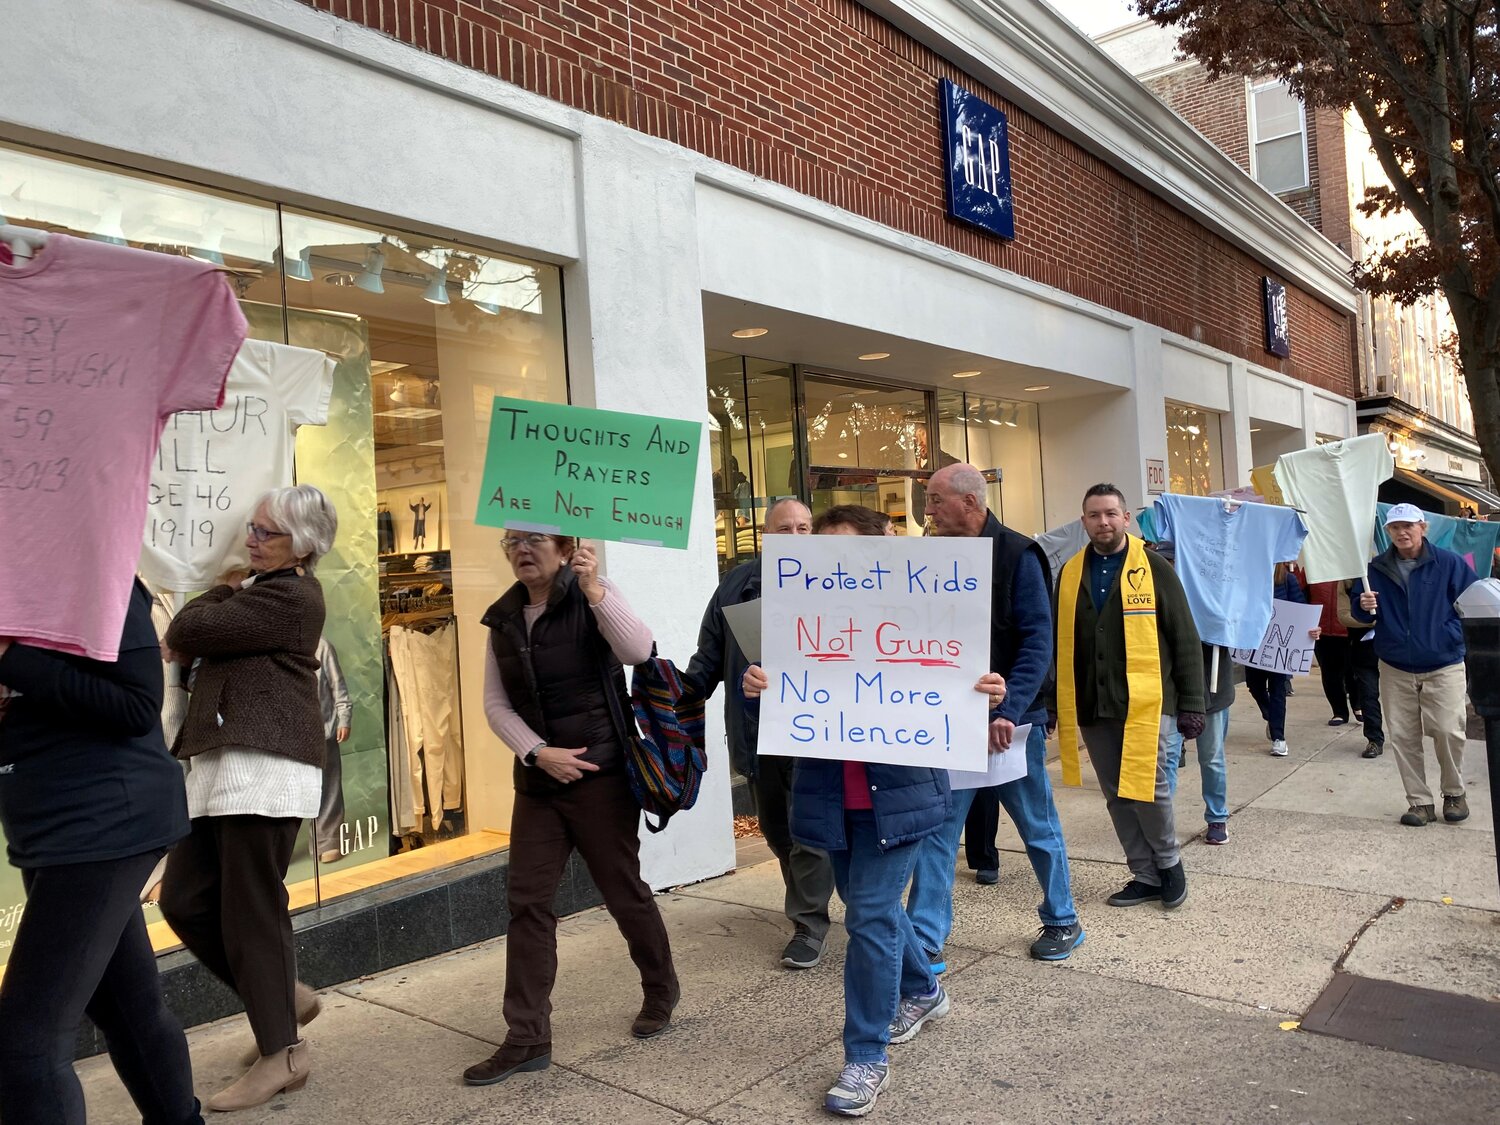 Following an interfaith worship program, about 100 people walked through Doylestown Borough Sunday drawing attention to the need for an end to gun violence through public education, legislation and advocacy.